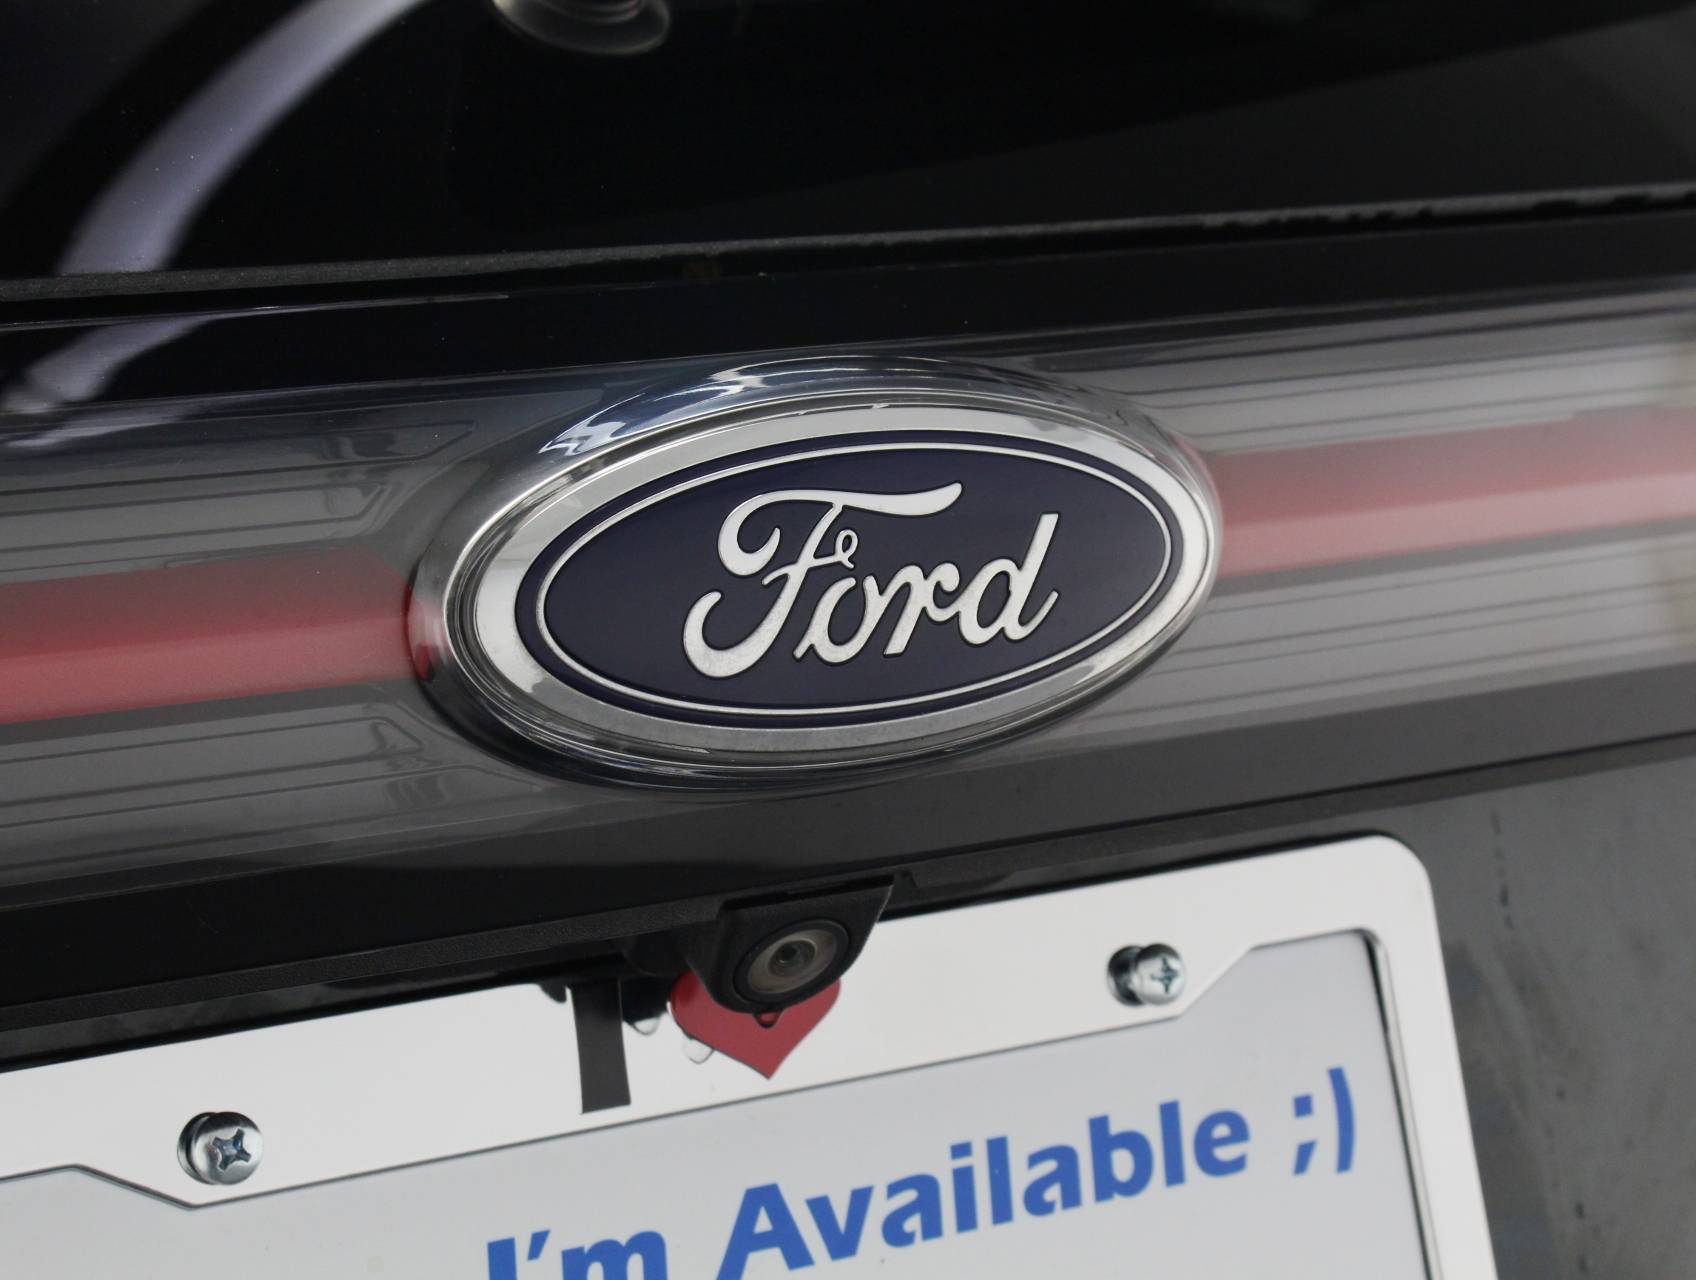 Florida Fine Cars - Used FORD EDGE 2015 WEST PALM SEL